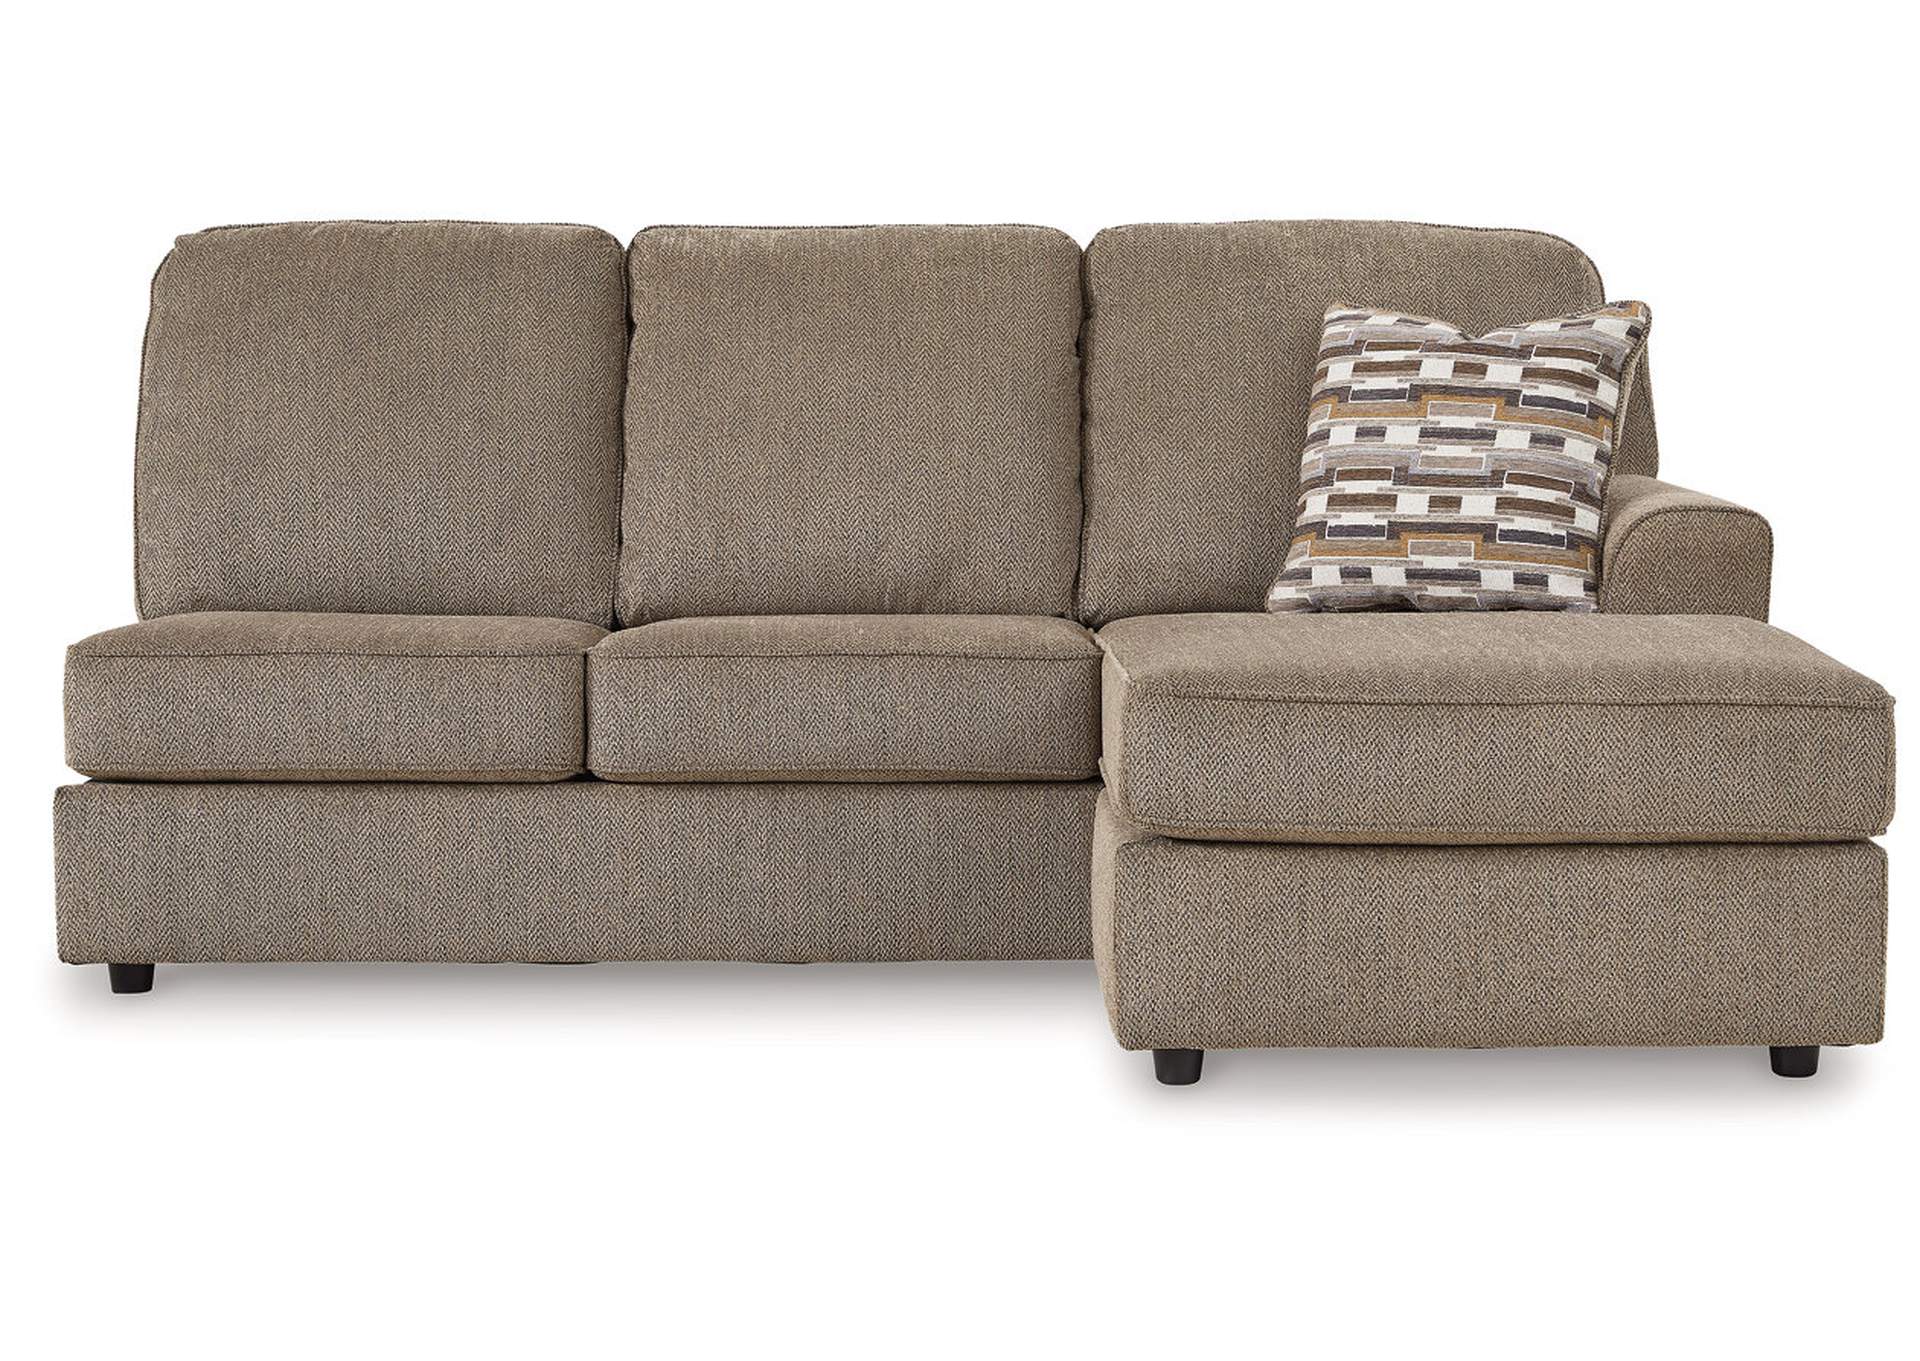 O'Phannon Right-Arm Facing Sofa Chaise,Signature Design By Ashley